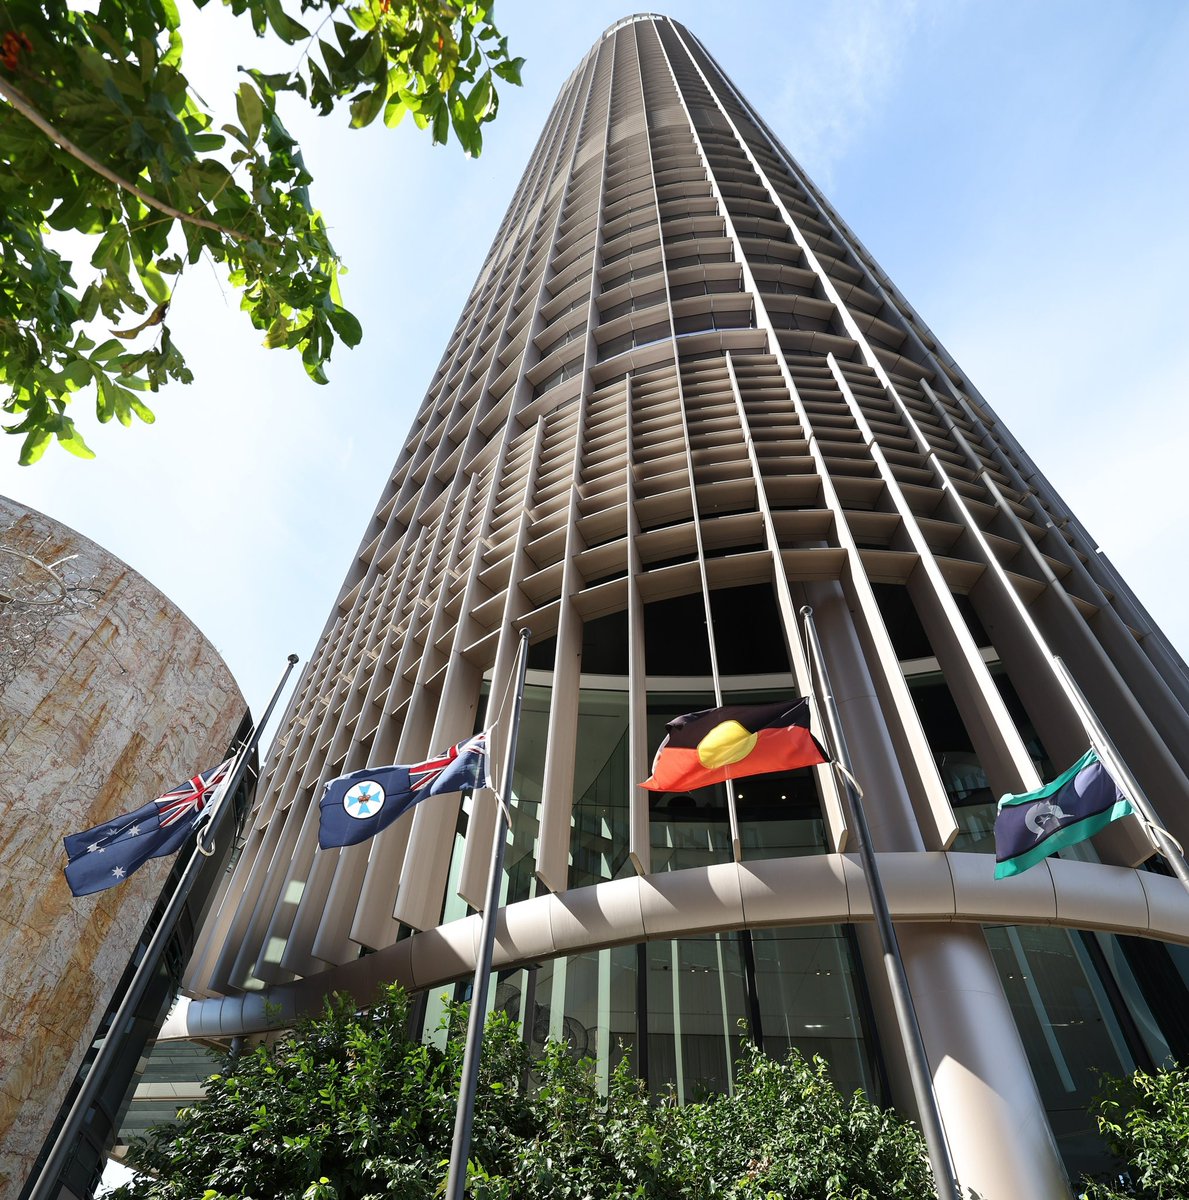 Flags are at half mast on Queensland Government buildings today. To honour the Bondi Junction victims – and in solidarity with everyone affected. We're with you, Sydney.